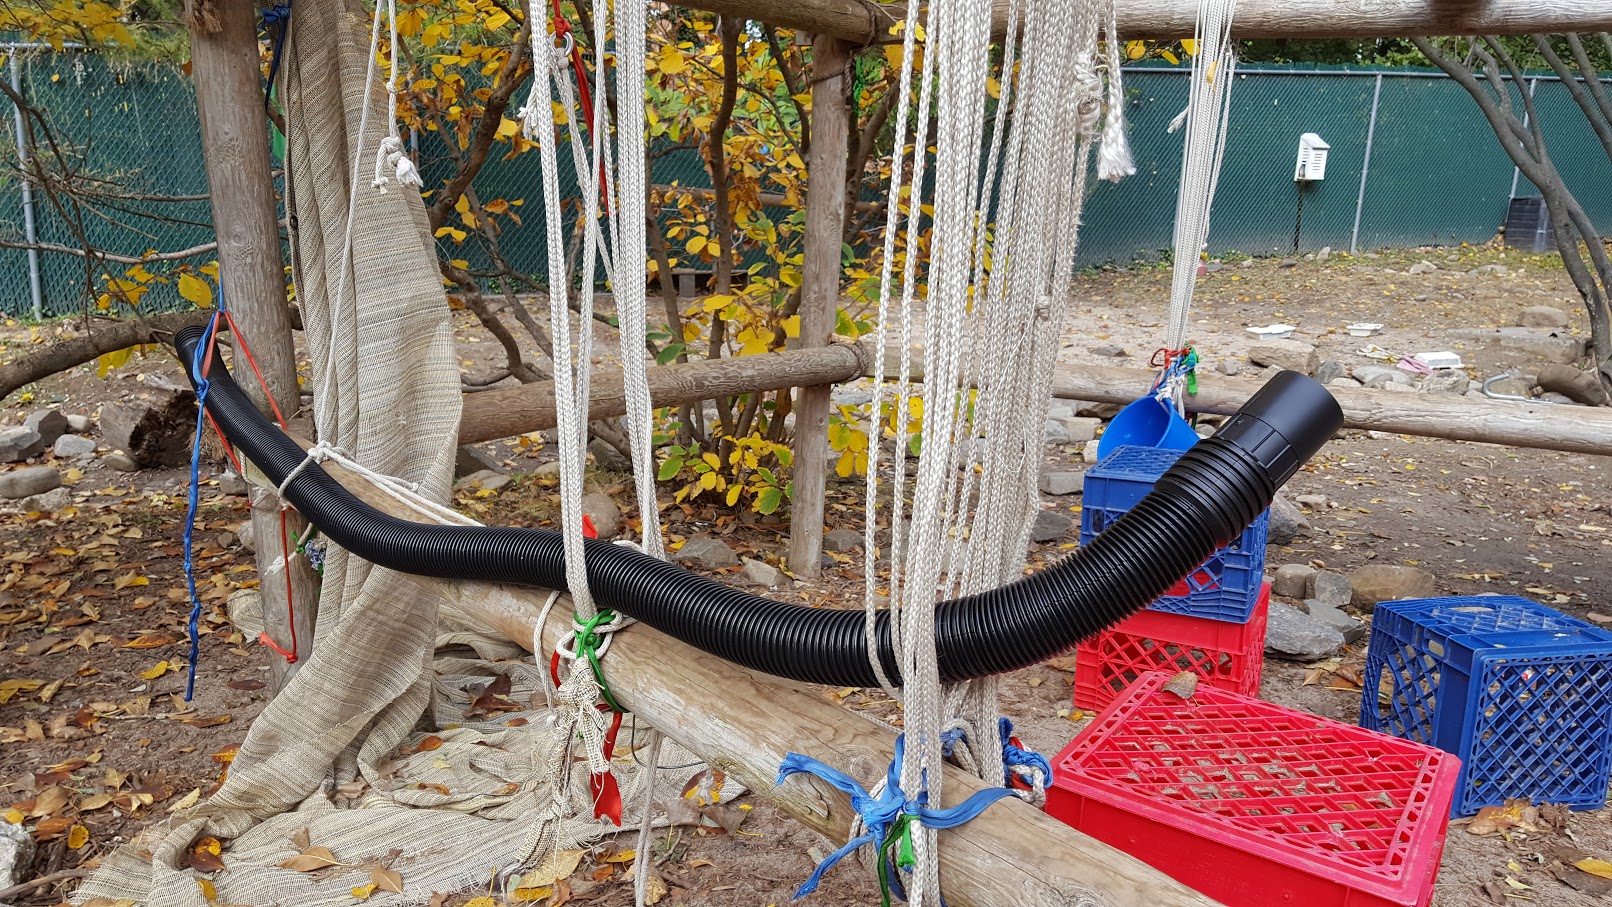  Photo is of a contraption of some kind made from rope, wood, and a black tube of some kind. Around it are various miscellaneous objects including plastic crates and buckets. 